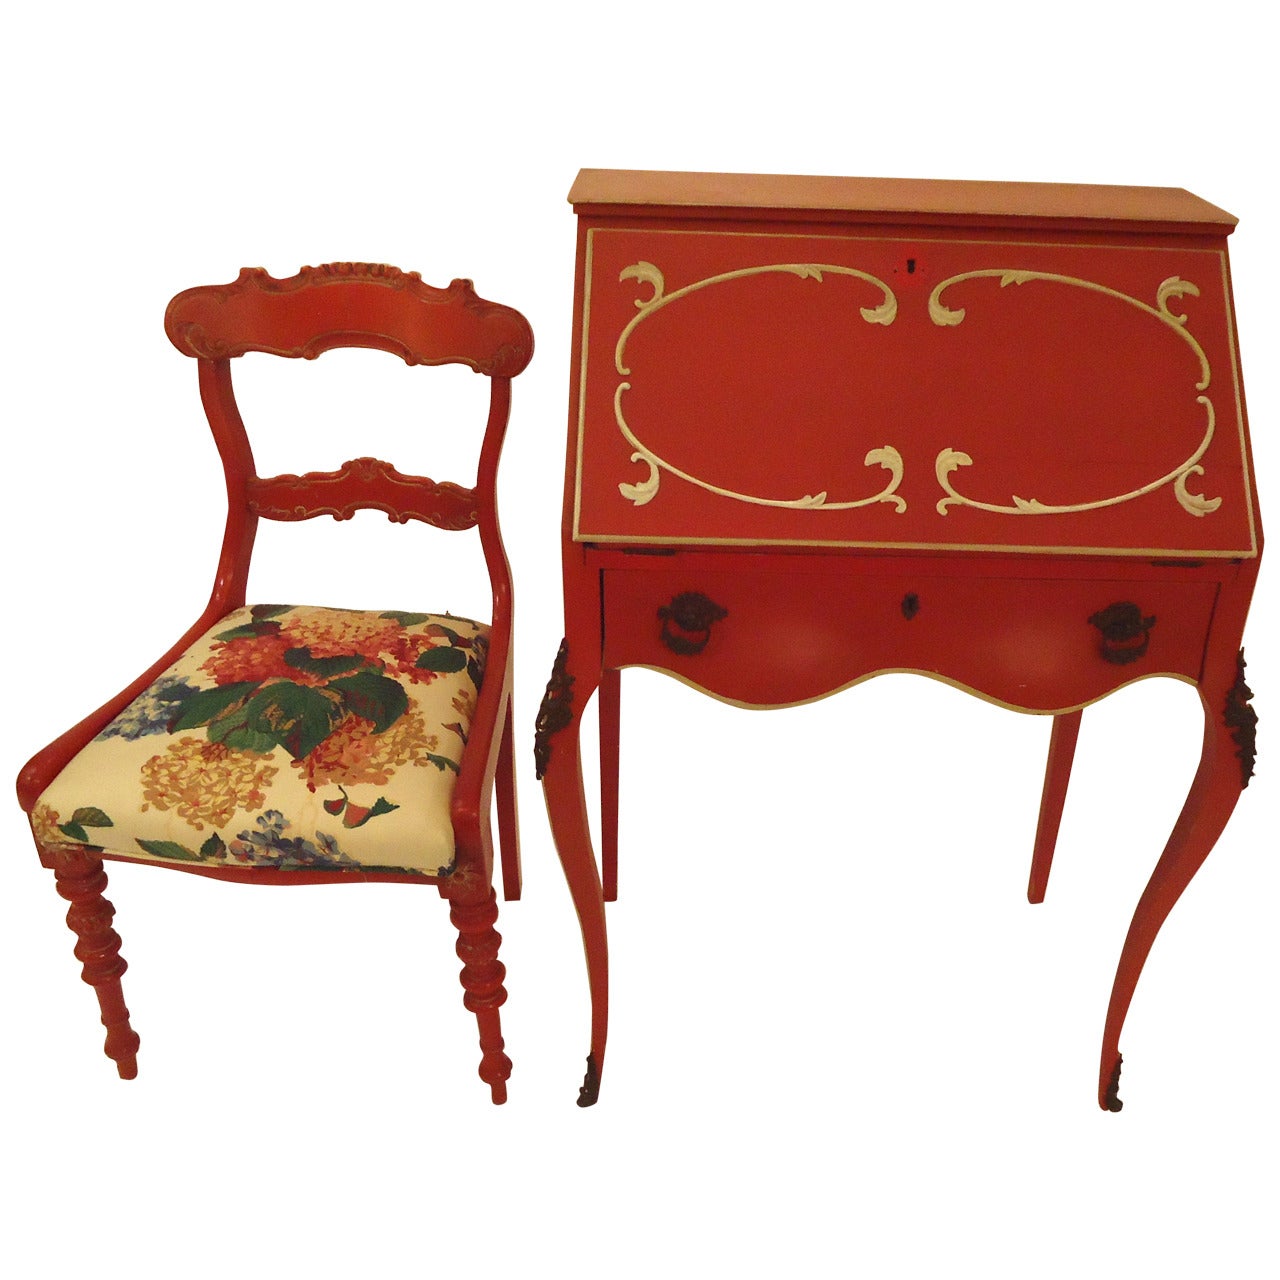 Darling French Antique Desk and Matching Chair